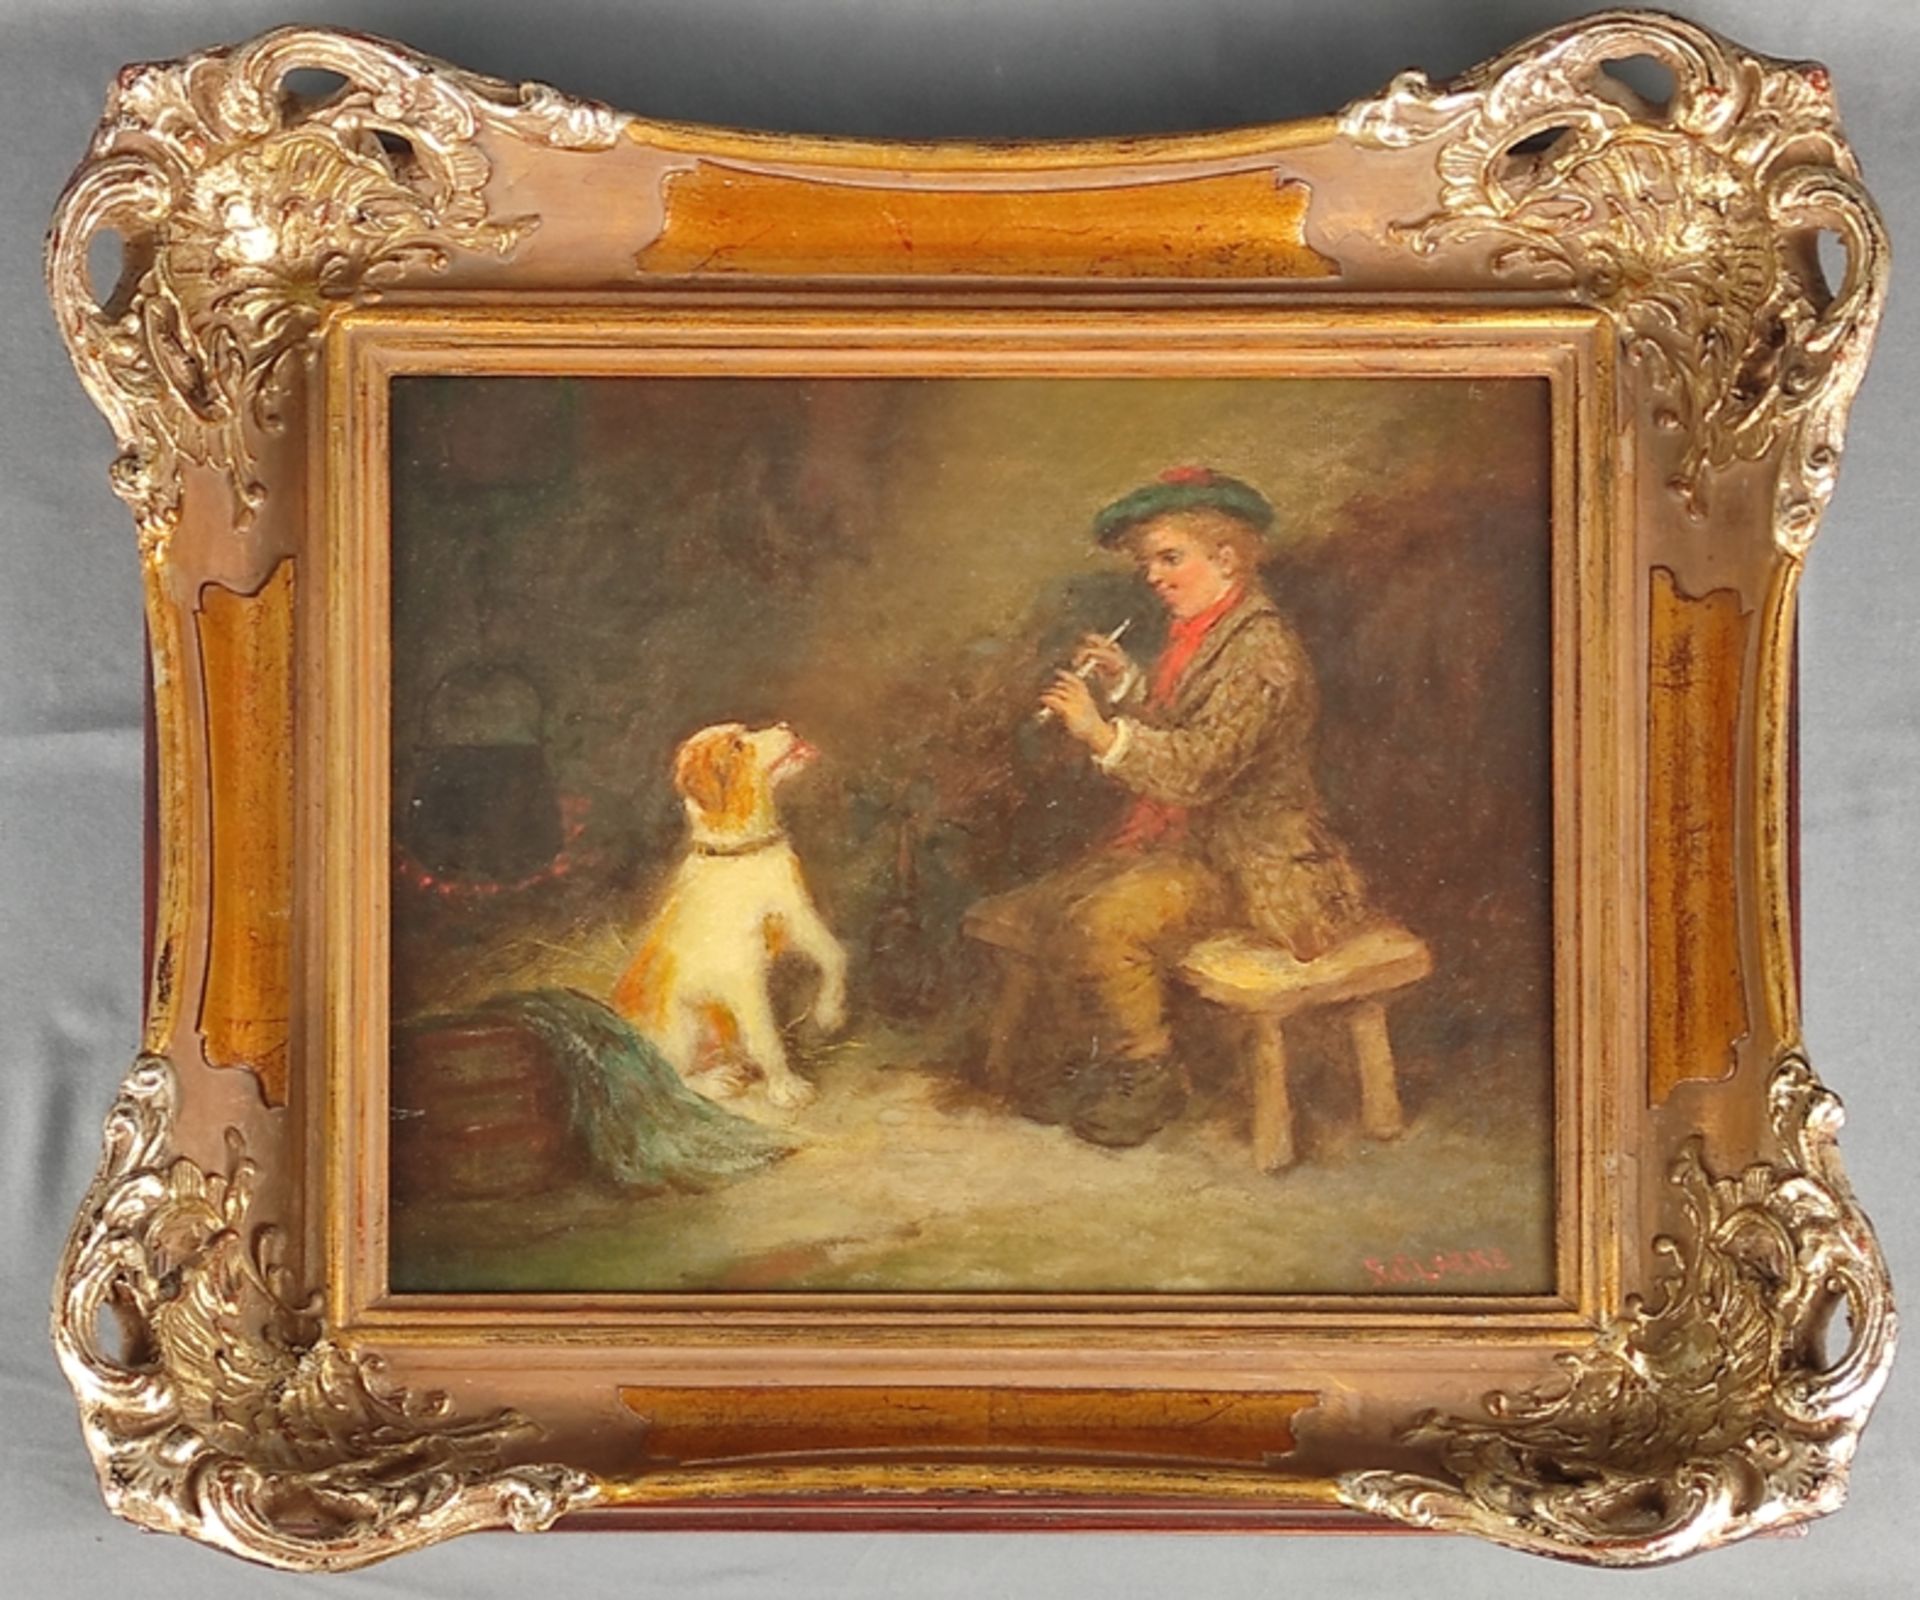 Clarke, S. (19th century, England) "Playing music", little boy playing flute to a dog, oil on canva - Image 2 of 4